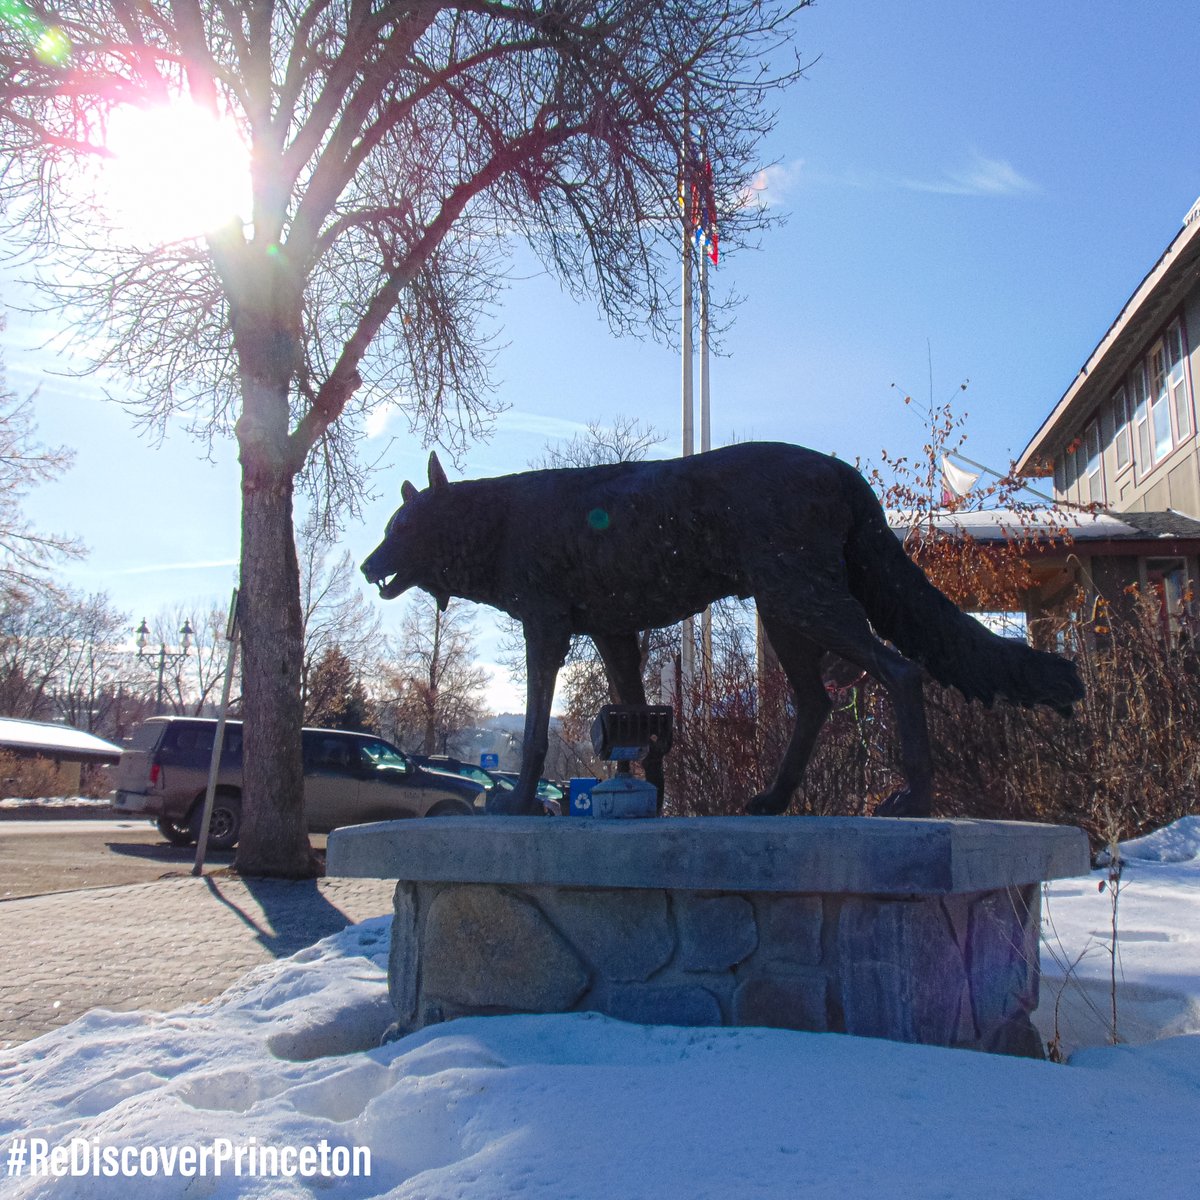 🐕 🌲 Take a spring walk and check the Bronze Sculpture Tour. Did you know the colour and texture of the coyote's fur vary somewhat geographically. #rediscoverprinceton #princetonbc #townofprincetonbc #cityhall #bcliving #similkameenvalley #tulameen #sculpture #canadianart🌲 📸